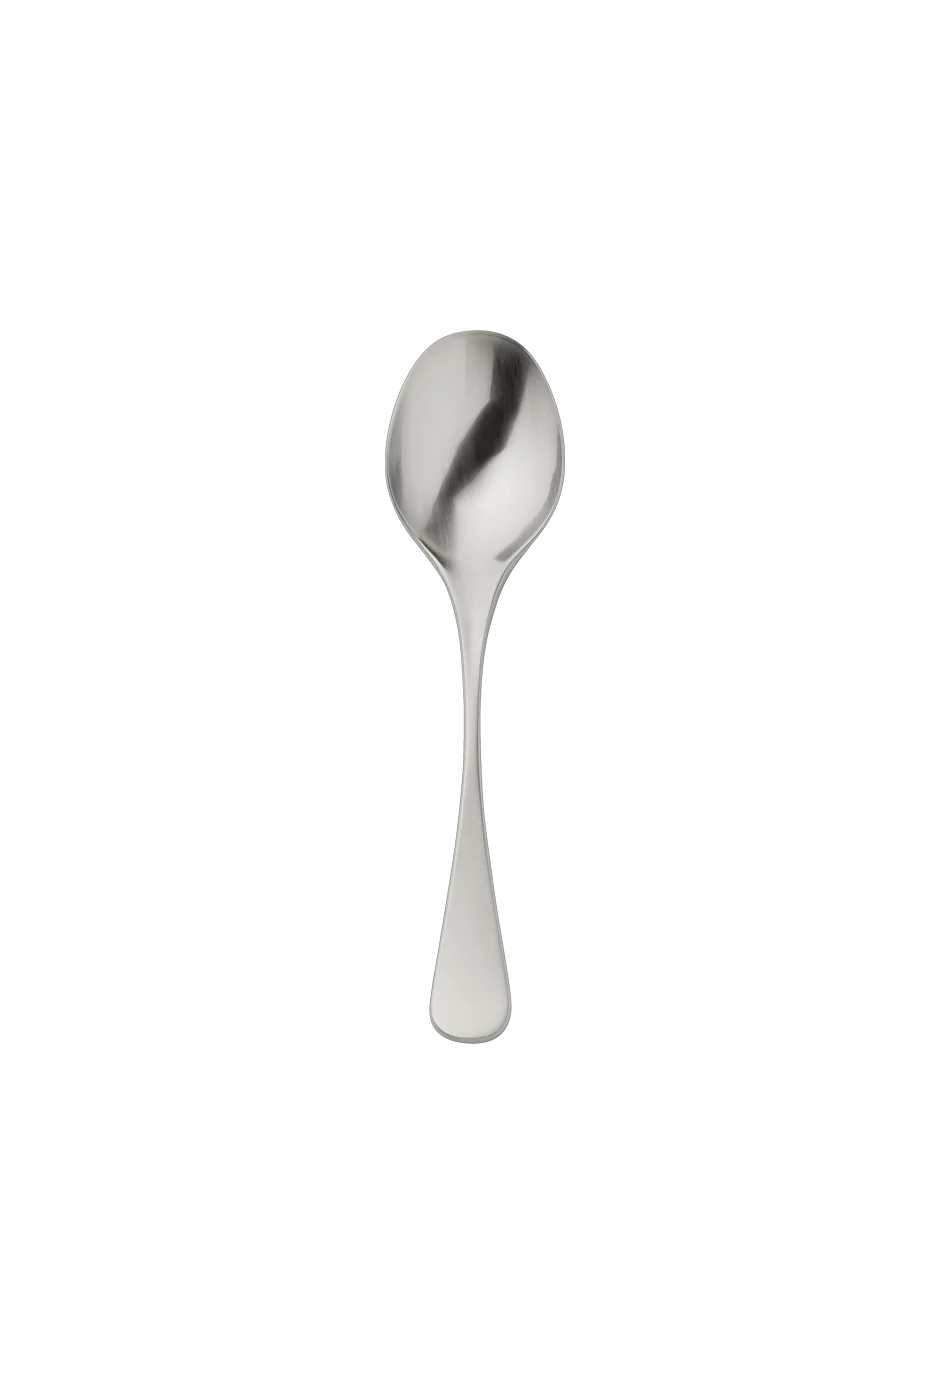 Scandia Cream Spoon (Broth Spoon) (18/8 stainless steel)